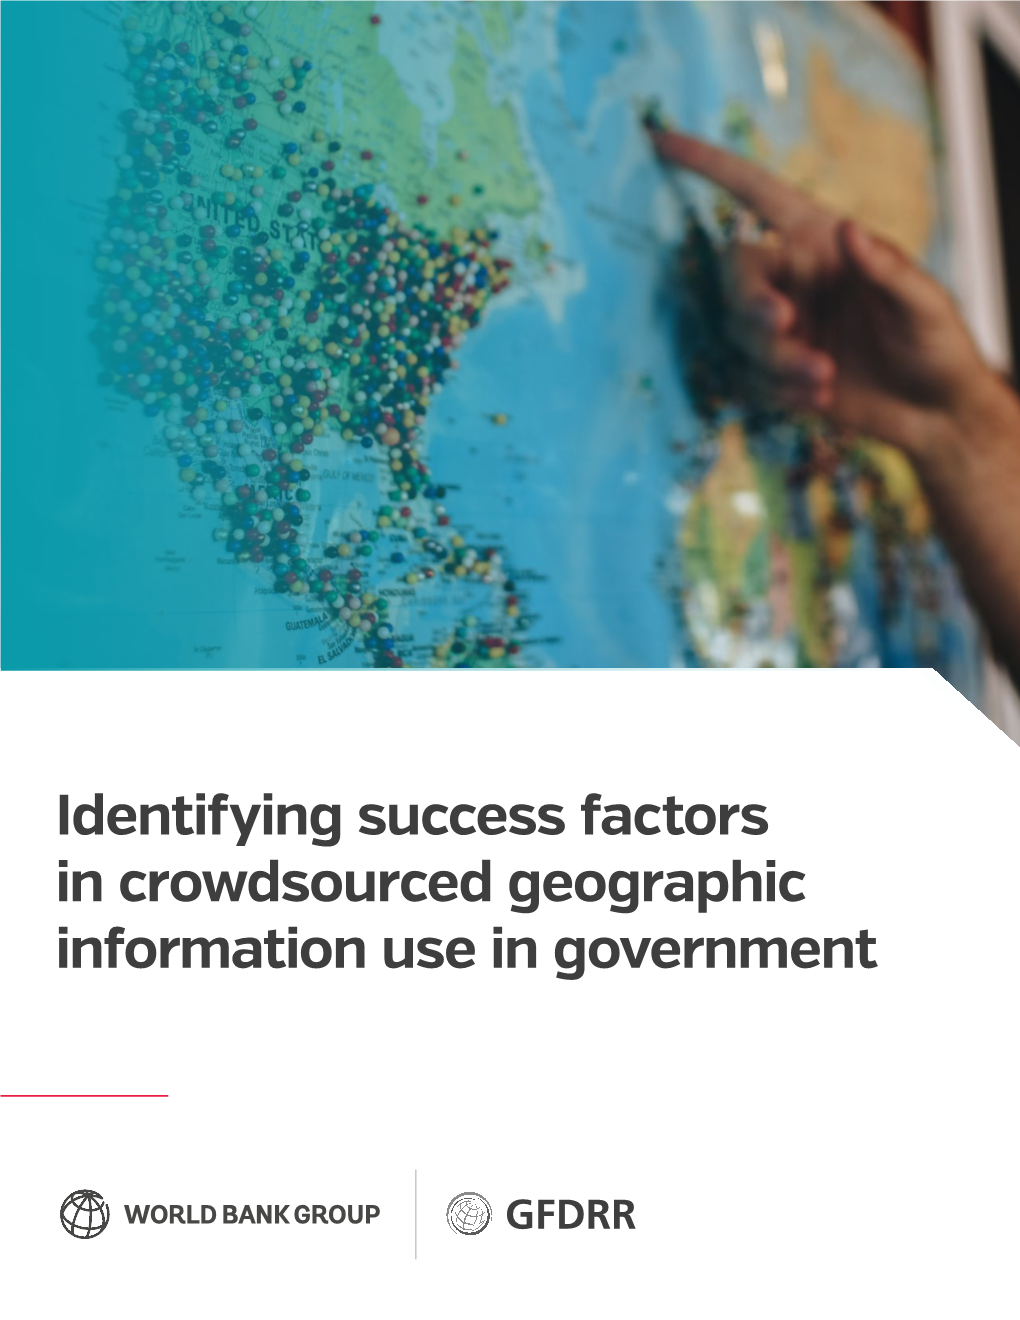 Identifying Success Factors in Crowdsourced Geographic Information Use in Government